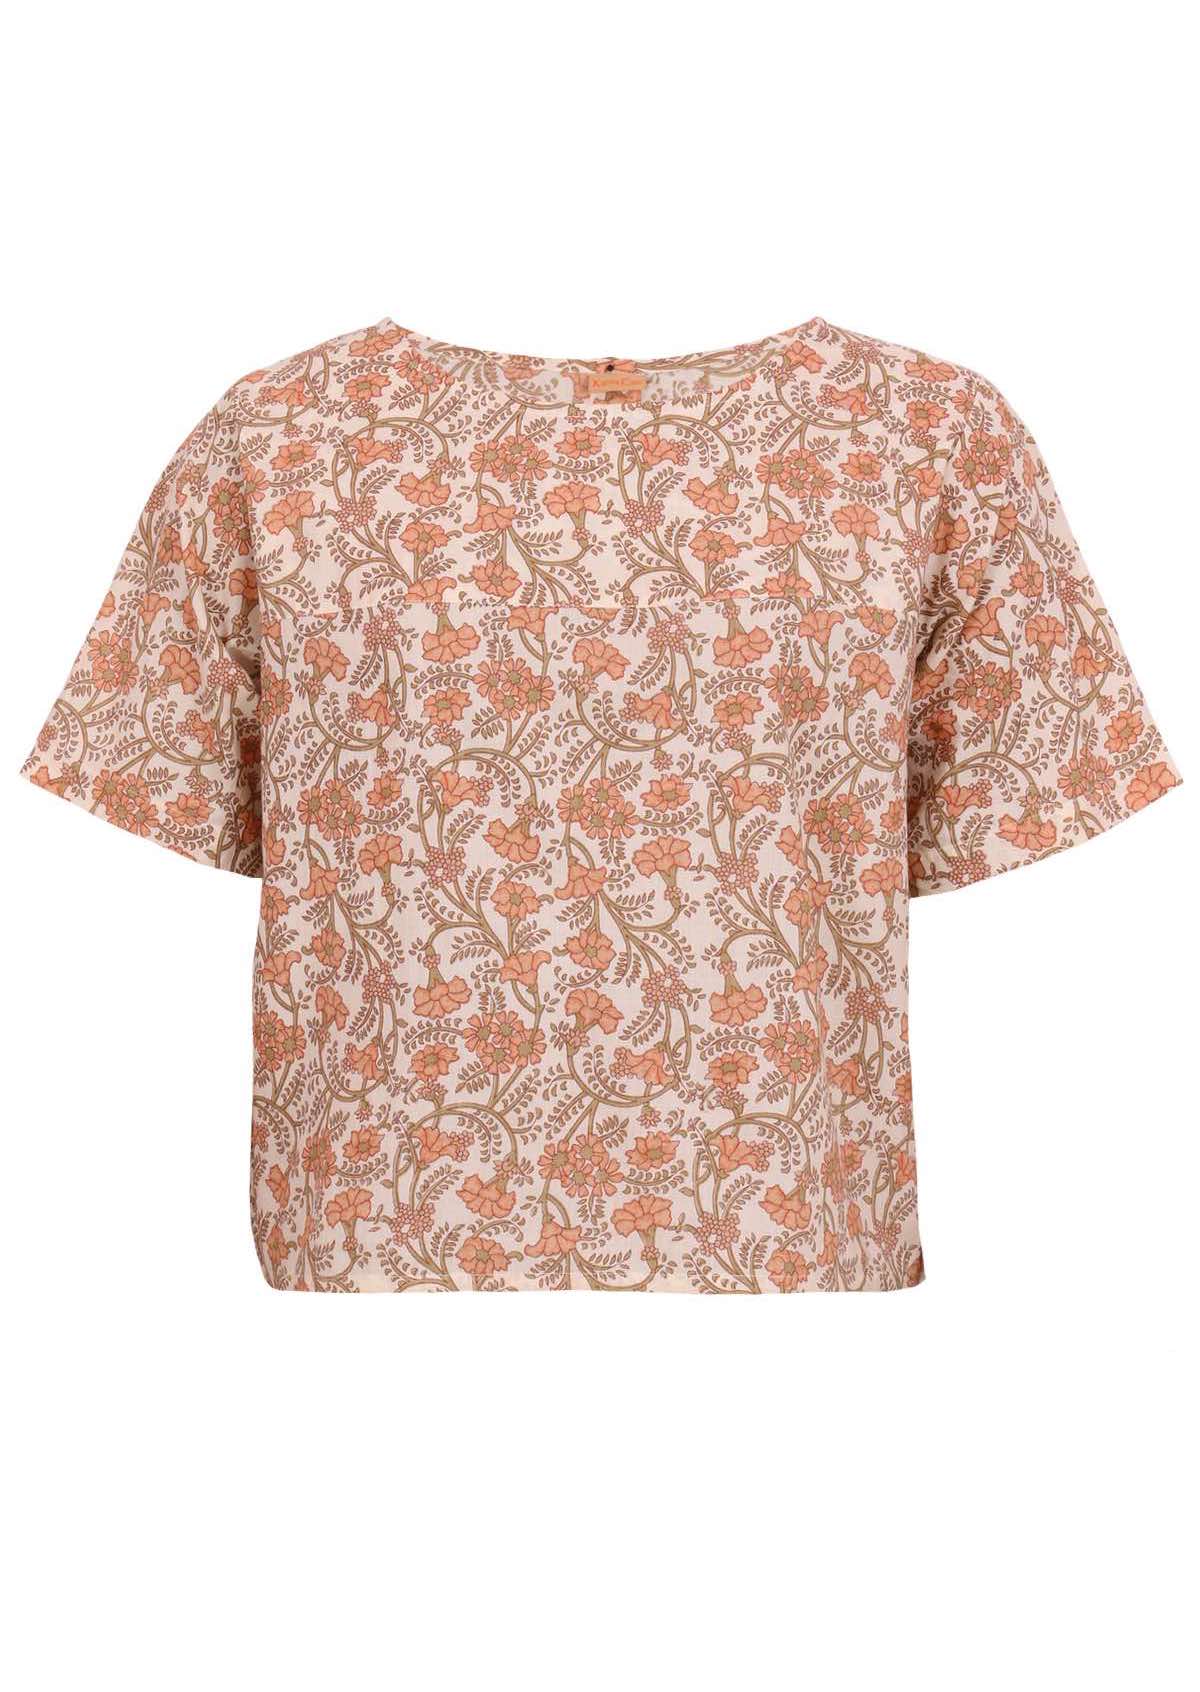 Front mannequin image of floral cotton top